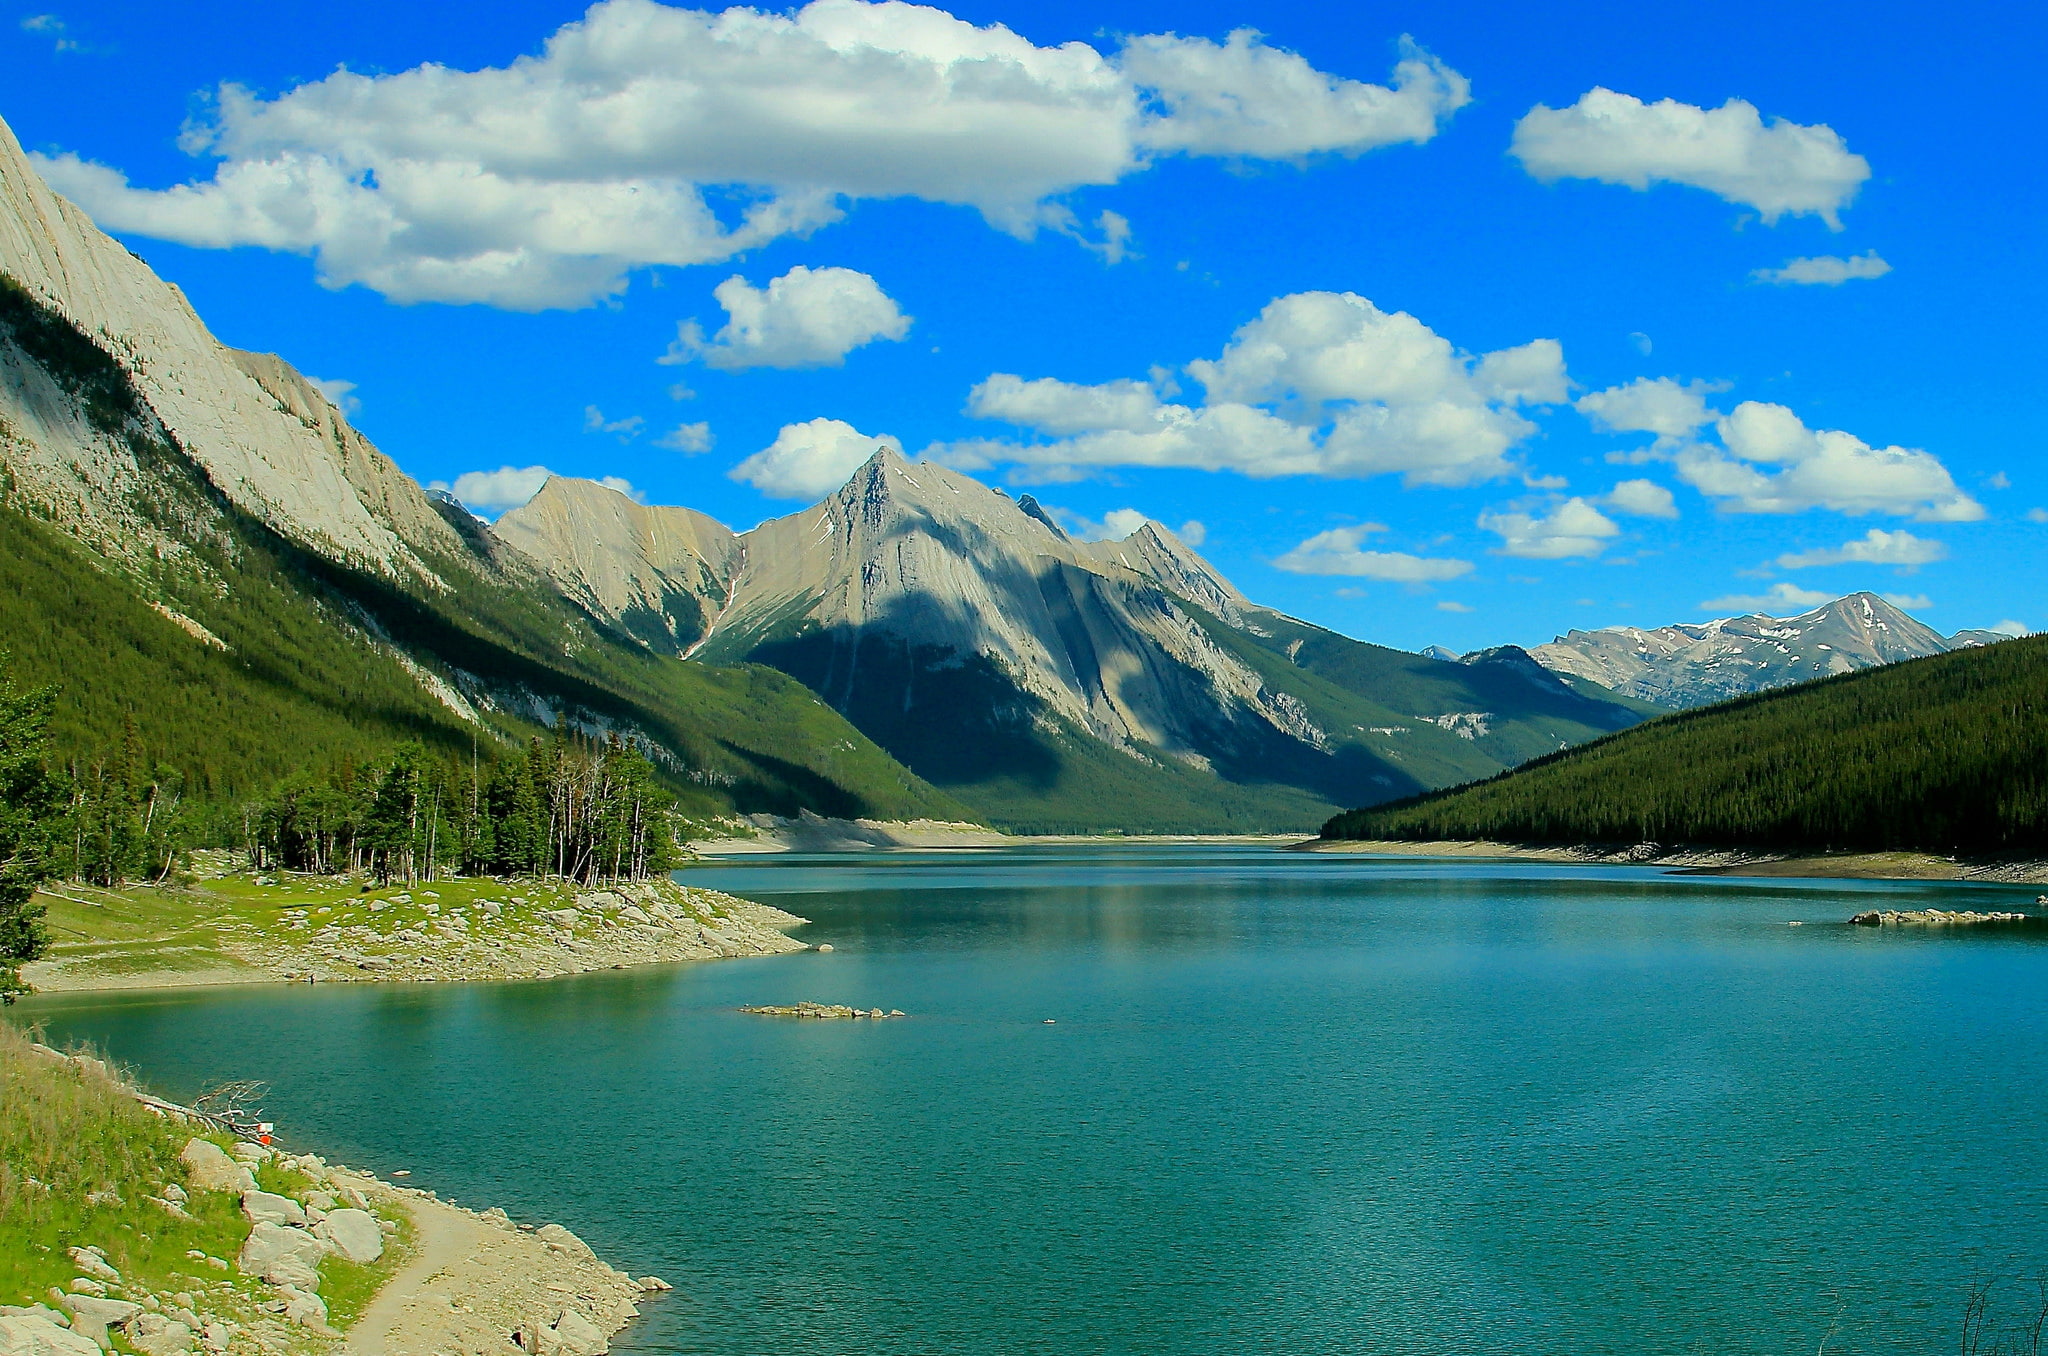 body of water, forest, clouds, trees, mountains, lake, Canada